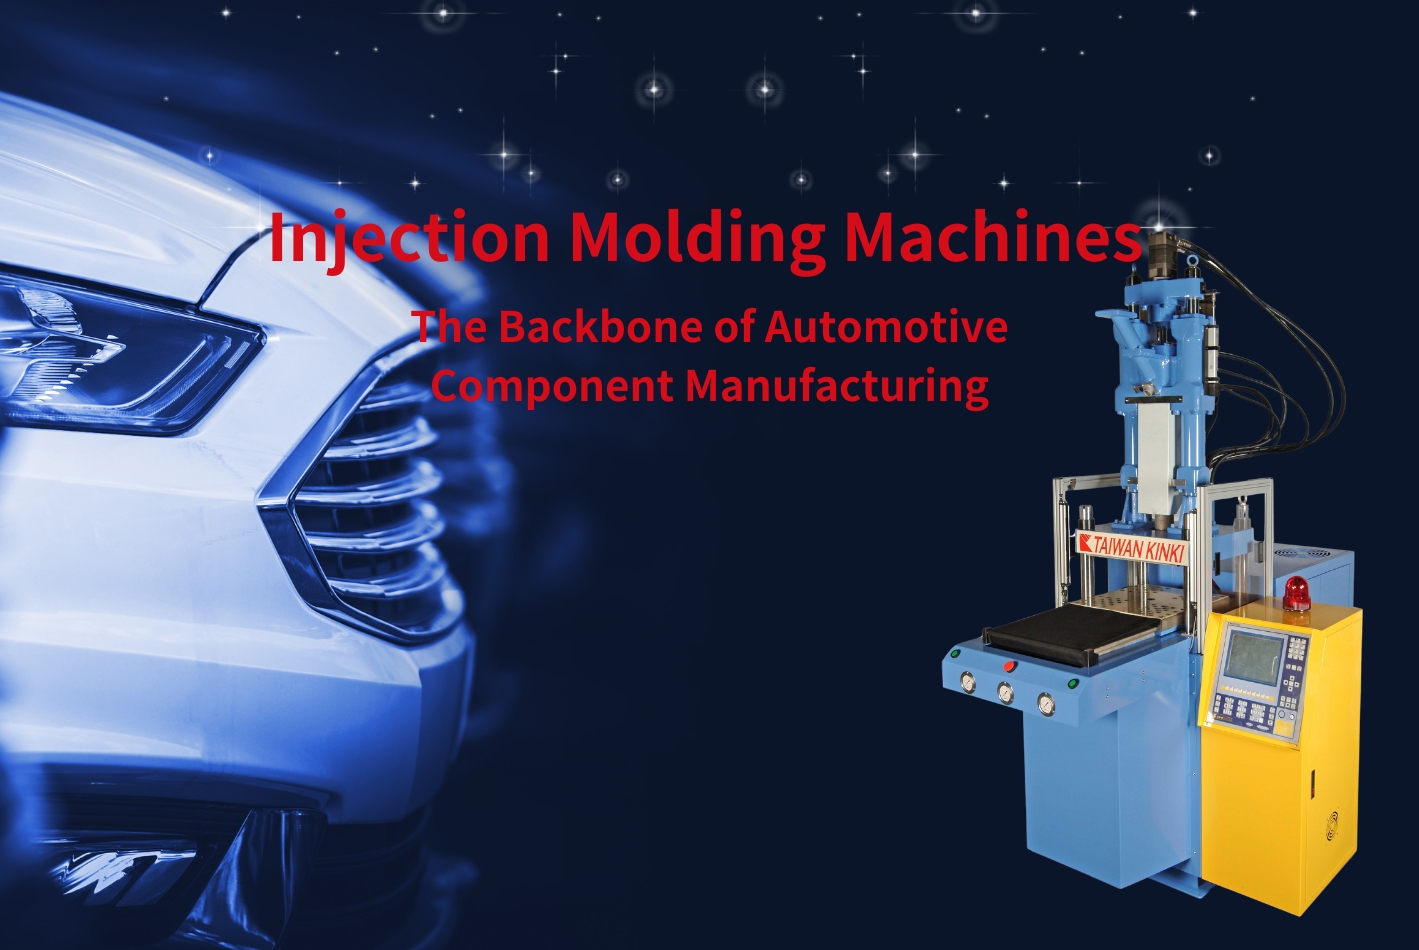 Injection Molding Machines : The Backbone of Automotive Component Manufacturing